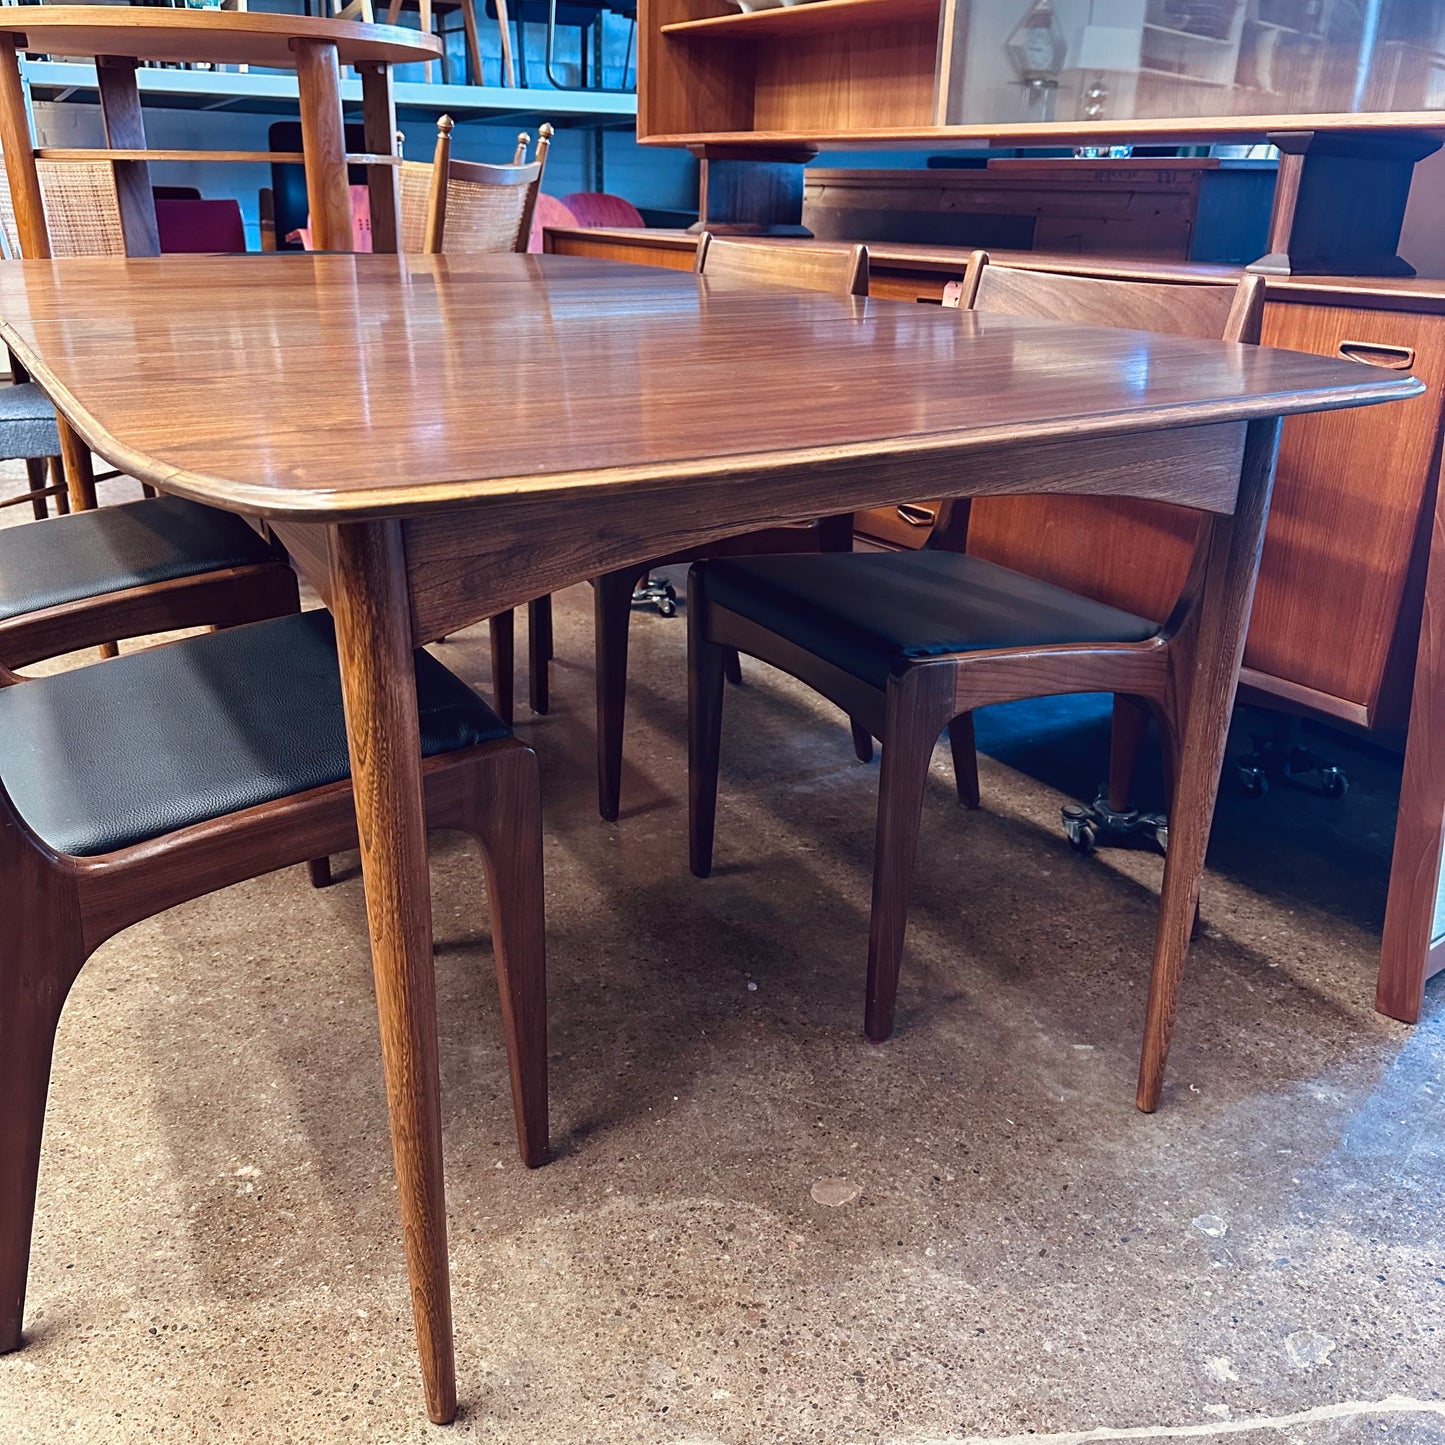 72” WALNUT DINING TABLE WITH TWO LEAVES - REFINISHED